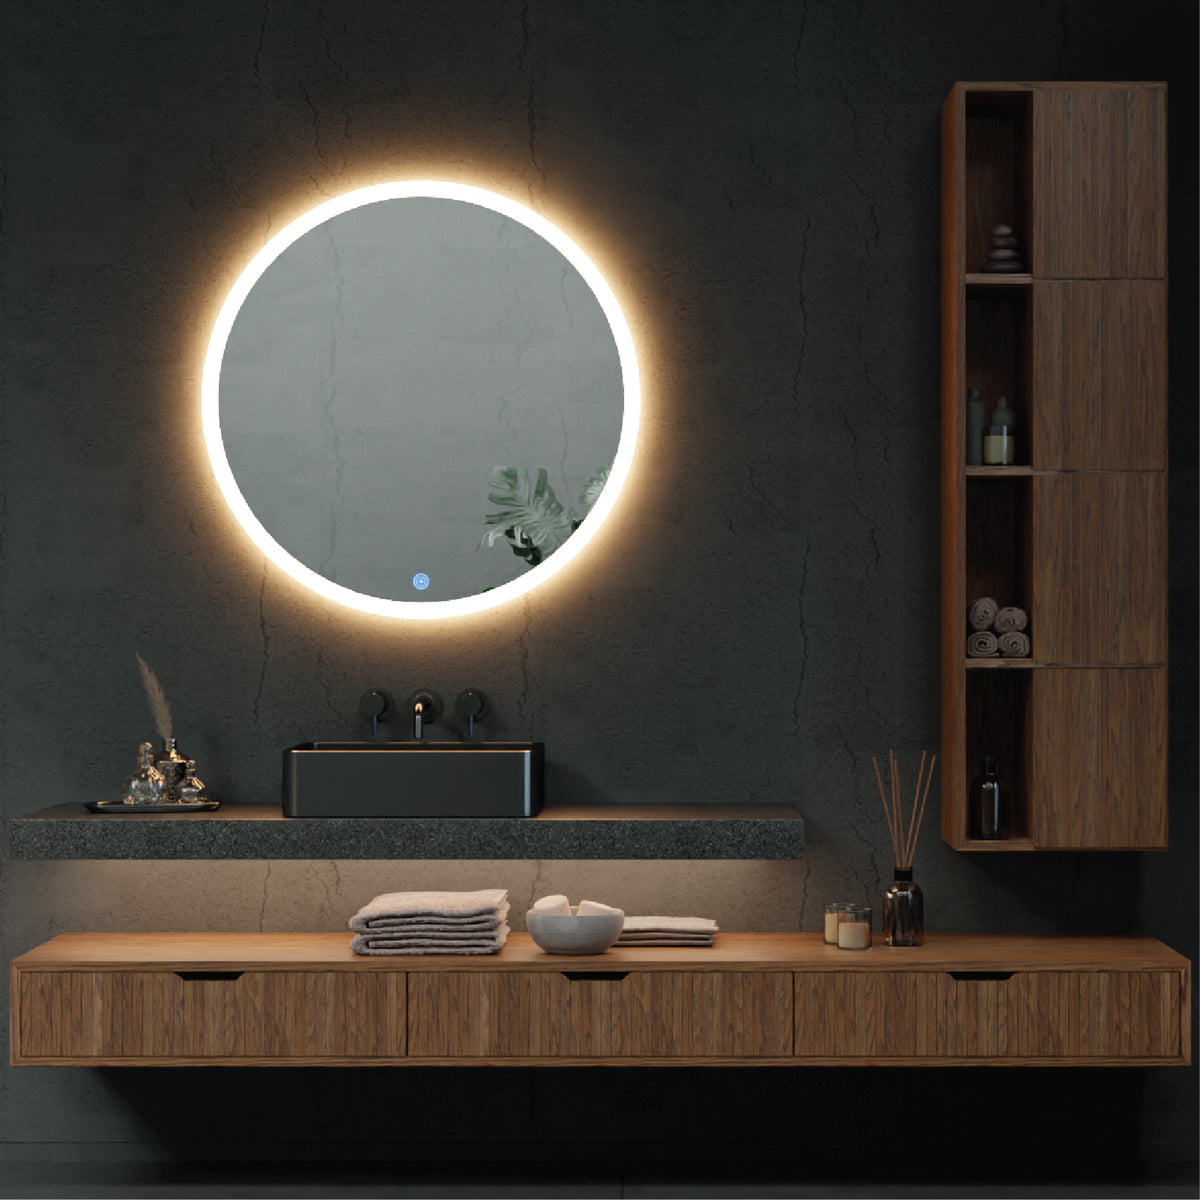 Choose from warm or cool light settings to suit your preference and create the desired ambiance in your bathroom space.